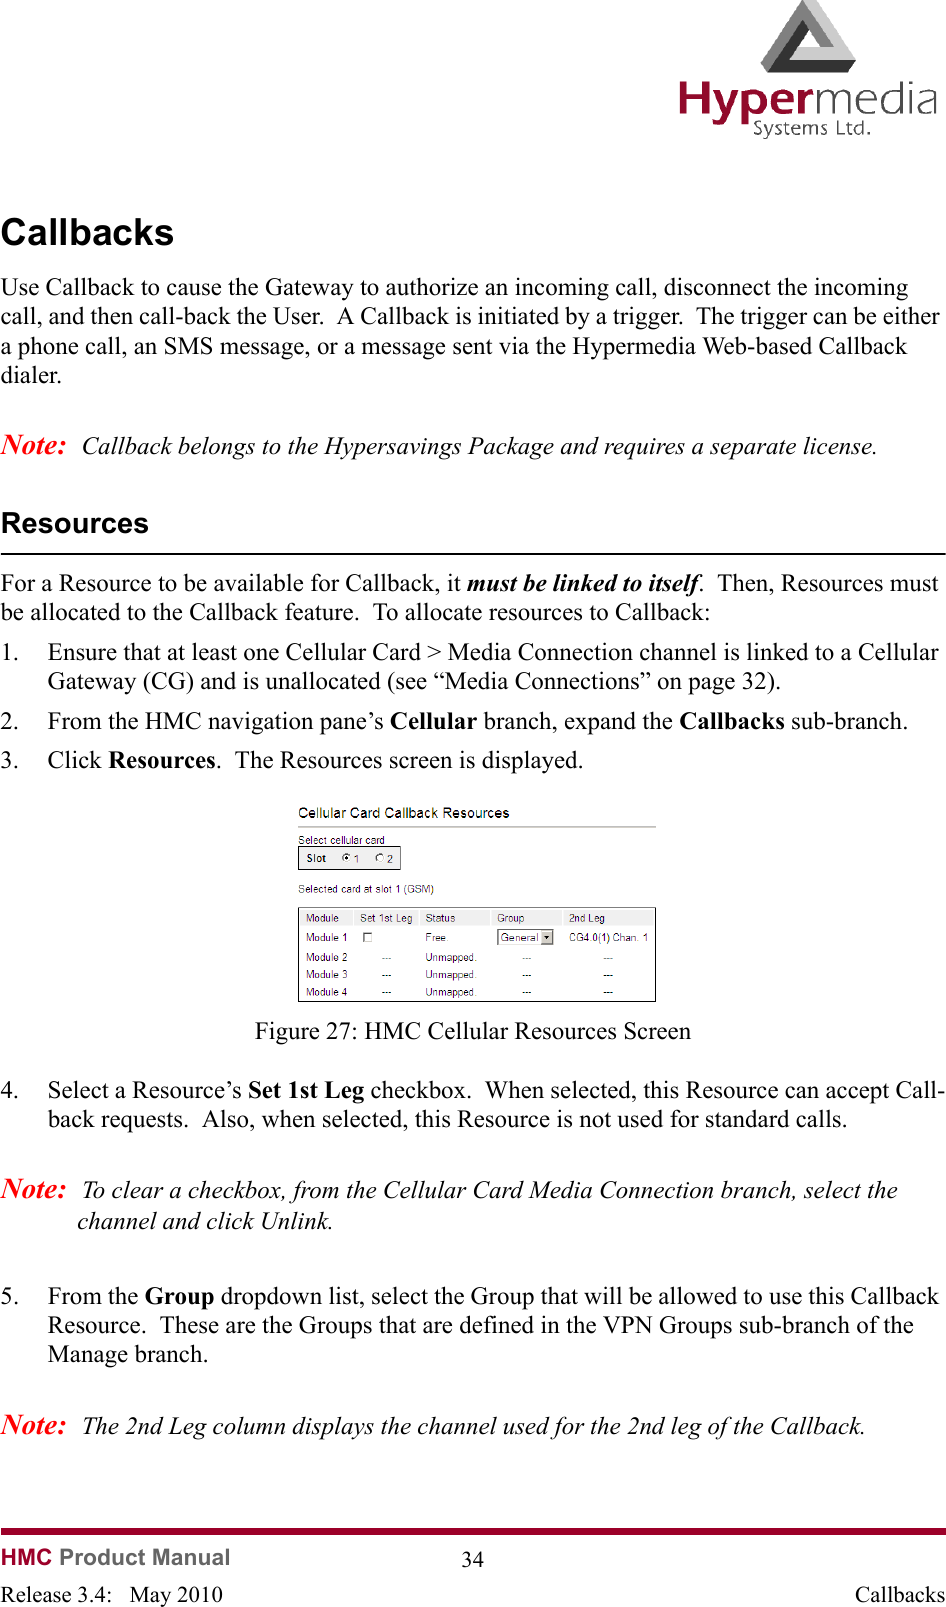   HMC Product Manual  34Release 3.4:   May 2010 CallbacksCallbacksUse Callback to cause the Gateway to authorize an incoming call, disconnect the incoming call, and then call-back the User.  A Callback is initiated by a trigger.  The trigger can be either a phone call, an SMS message, or a message sent via the Hypermedia Web-based Callback dialer.Note:  Callback belongs to the Hypersavings Package and requires a separate license.ResourcesFor a Resource to be available for Callback, it must be linked to itself.  Then, Resources must be allocated to the Callback feature.  To allocate resources to Callback:1. Ensure that at least one Cellular Card &gt; Media Connection channel is linked to a Cellular Gateway (CG) and is unallocated (see “Media Connections” on page 32).2. From the HMC navigation pane’s Cellular branch, expand the Callbacks sub-branch.  3. Click Resources.  The Resources screen is displayed.              Figure 27: HMC Cellular Resources Screen4. Select a Resource’s Set 1st Leg checkbox.  When selected, this Resource can accept Call-back requests.  Also, when selected, this Resource is not used for standard calls.Note:  To clear a checkbox, from the Cellular Card Media Connection branch, select the channel and click Unlink.5. From the Group dropdown list, select the Group that will be allowed to use this Callback Resource.  These are the Groups that are defined in the VPN Groups sub-branch of the Manage branch.Note:  The 2nd Leg column displays the channel used for the 2nd leg of the Callback.  